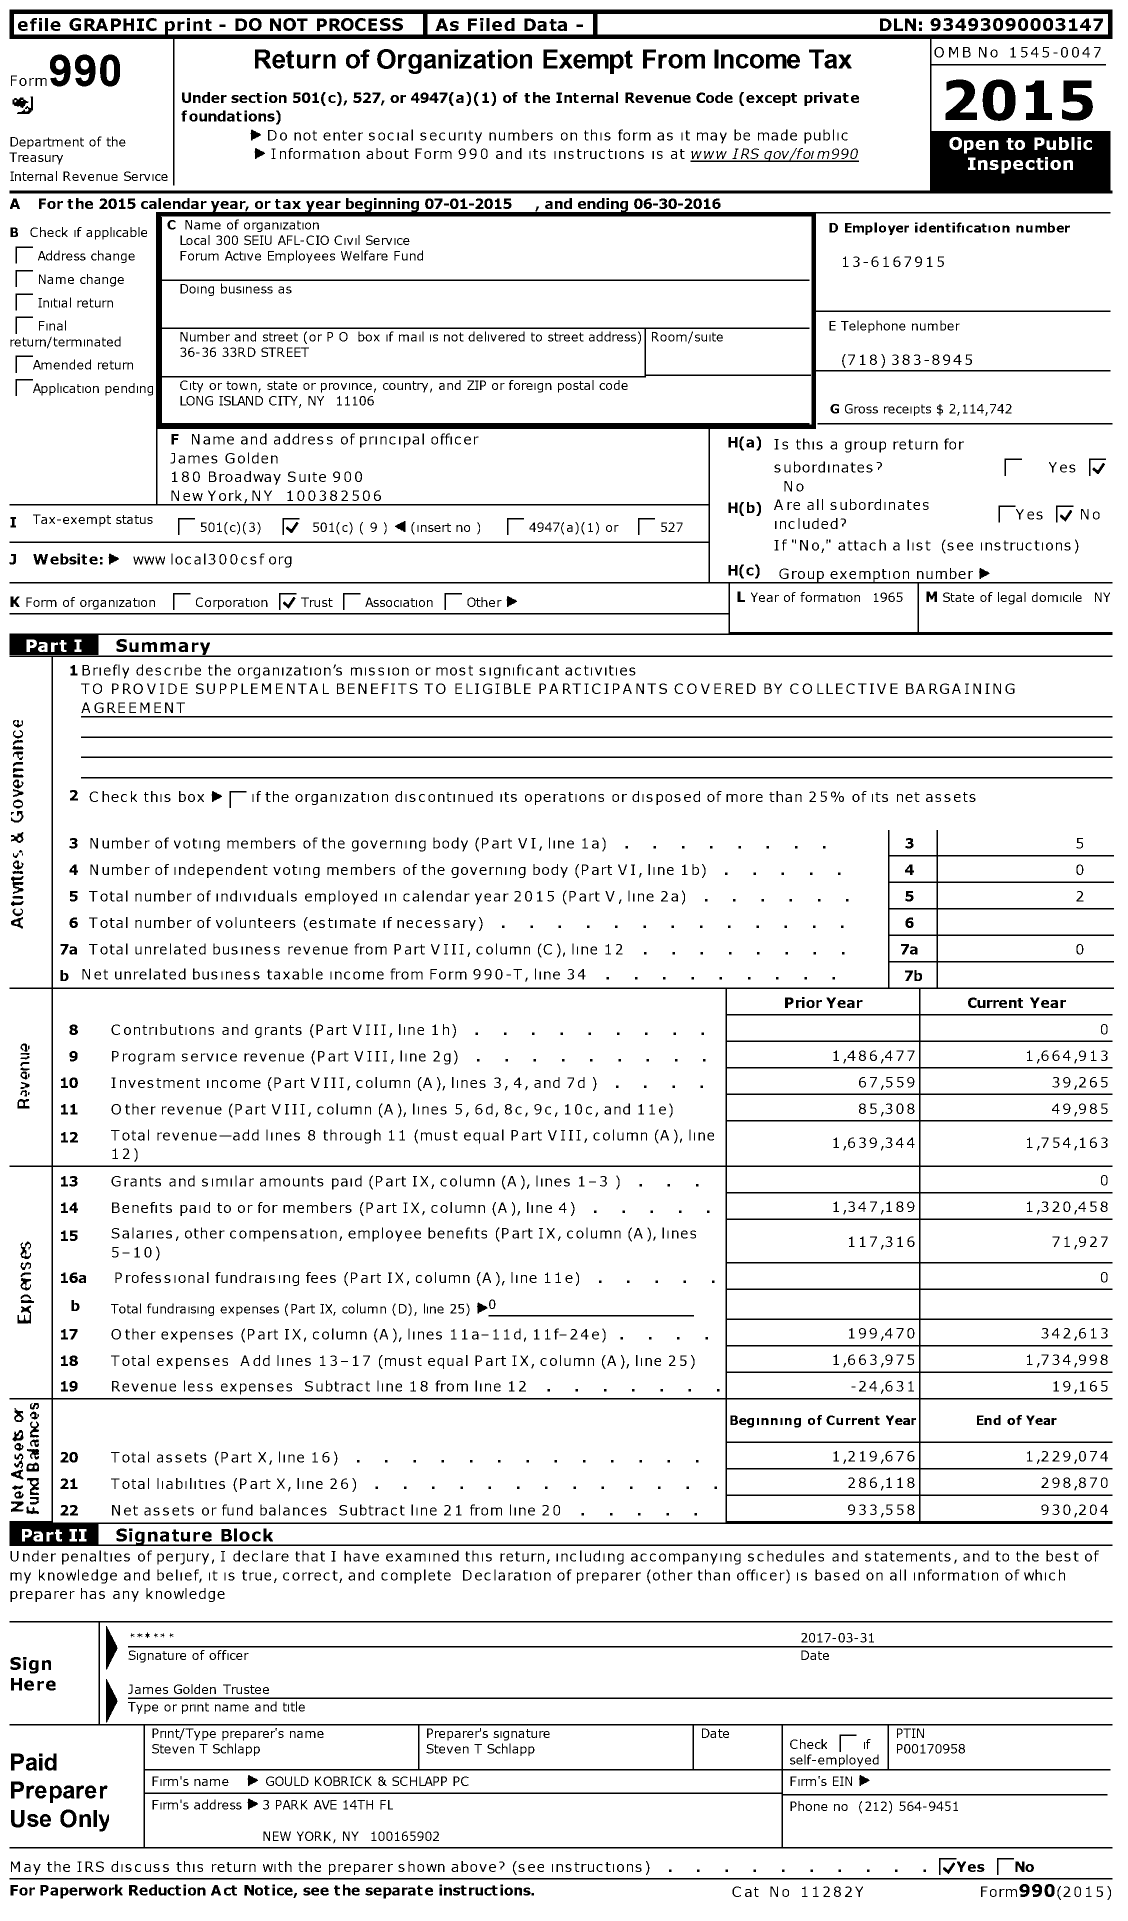 Image of first page of 2015 Form 990O for Local 300 SEIU AFL-CIO Civil Service Forum Active Employees Welfare Fund